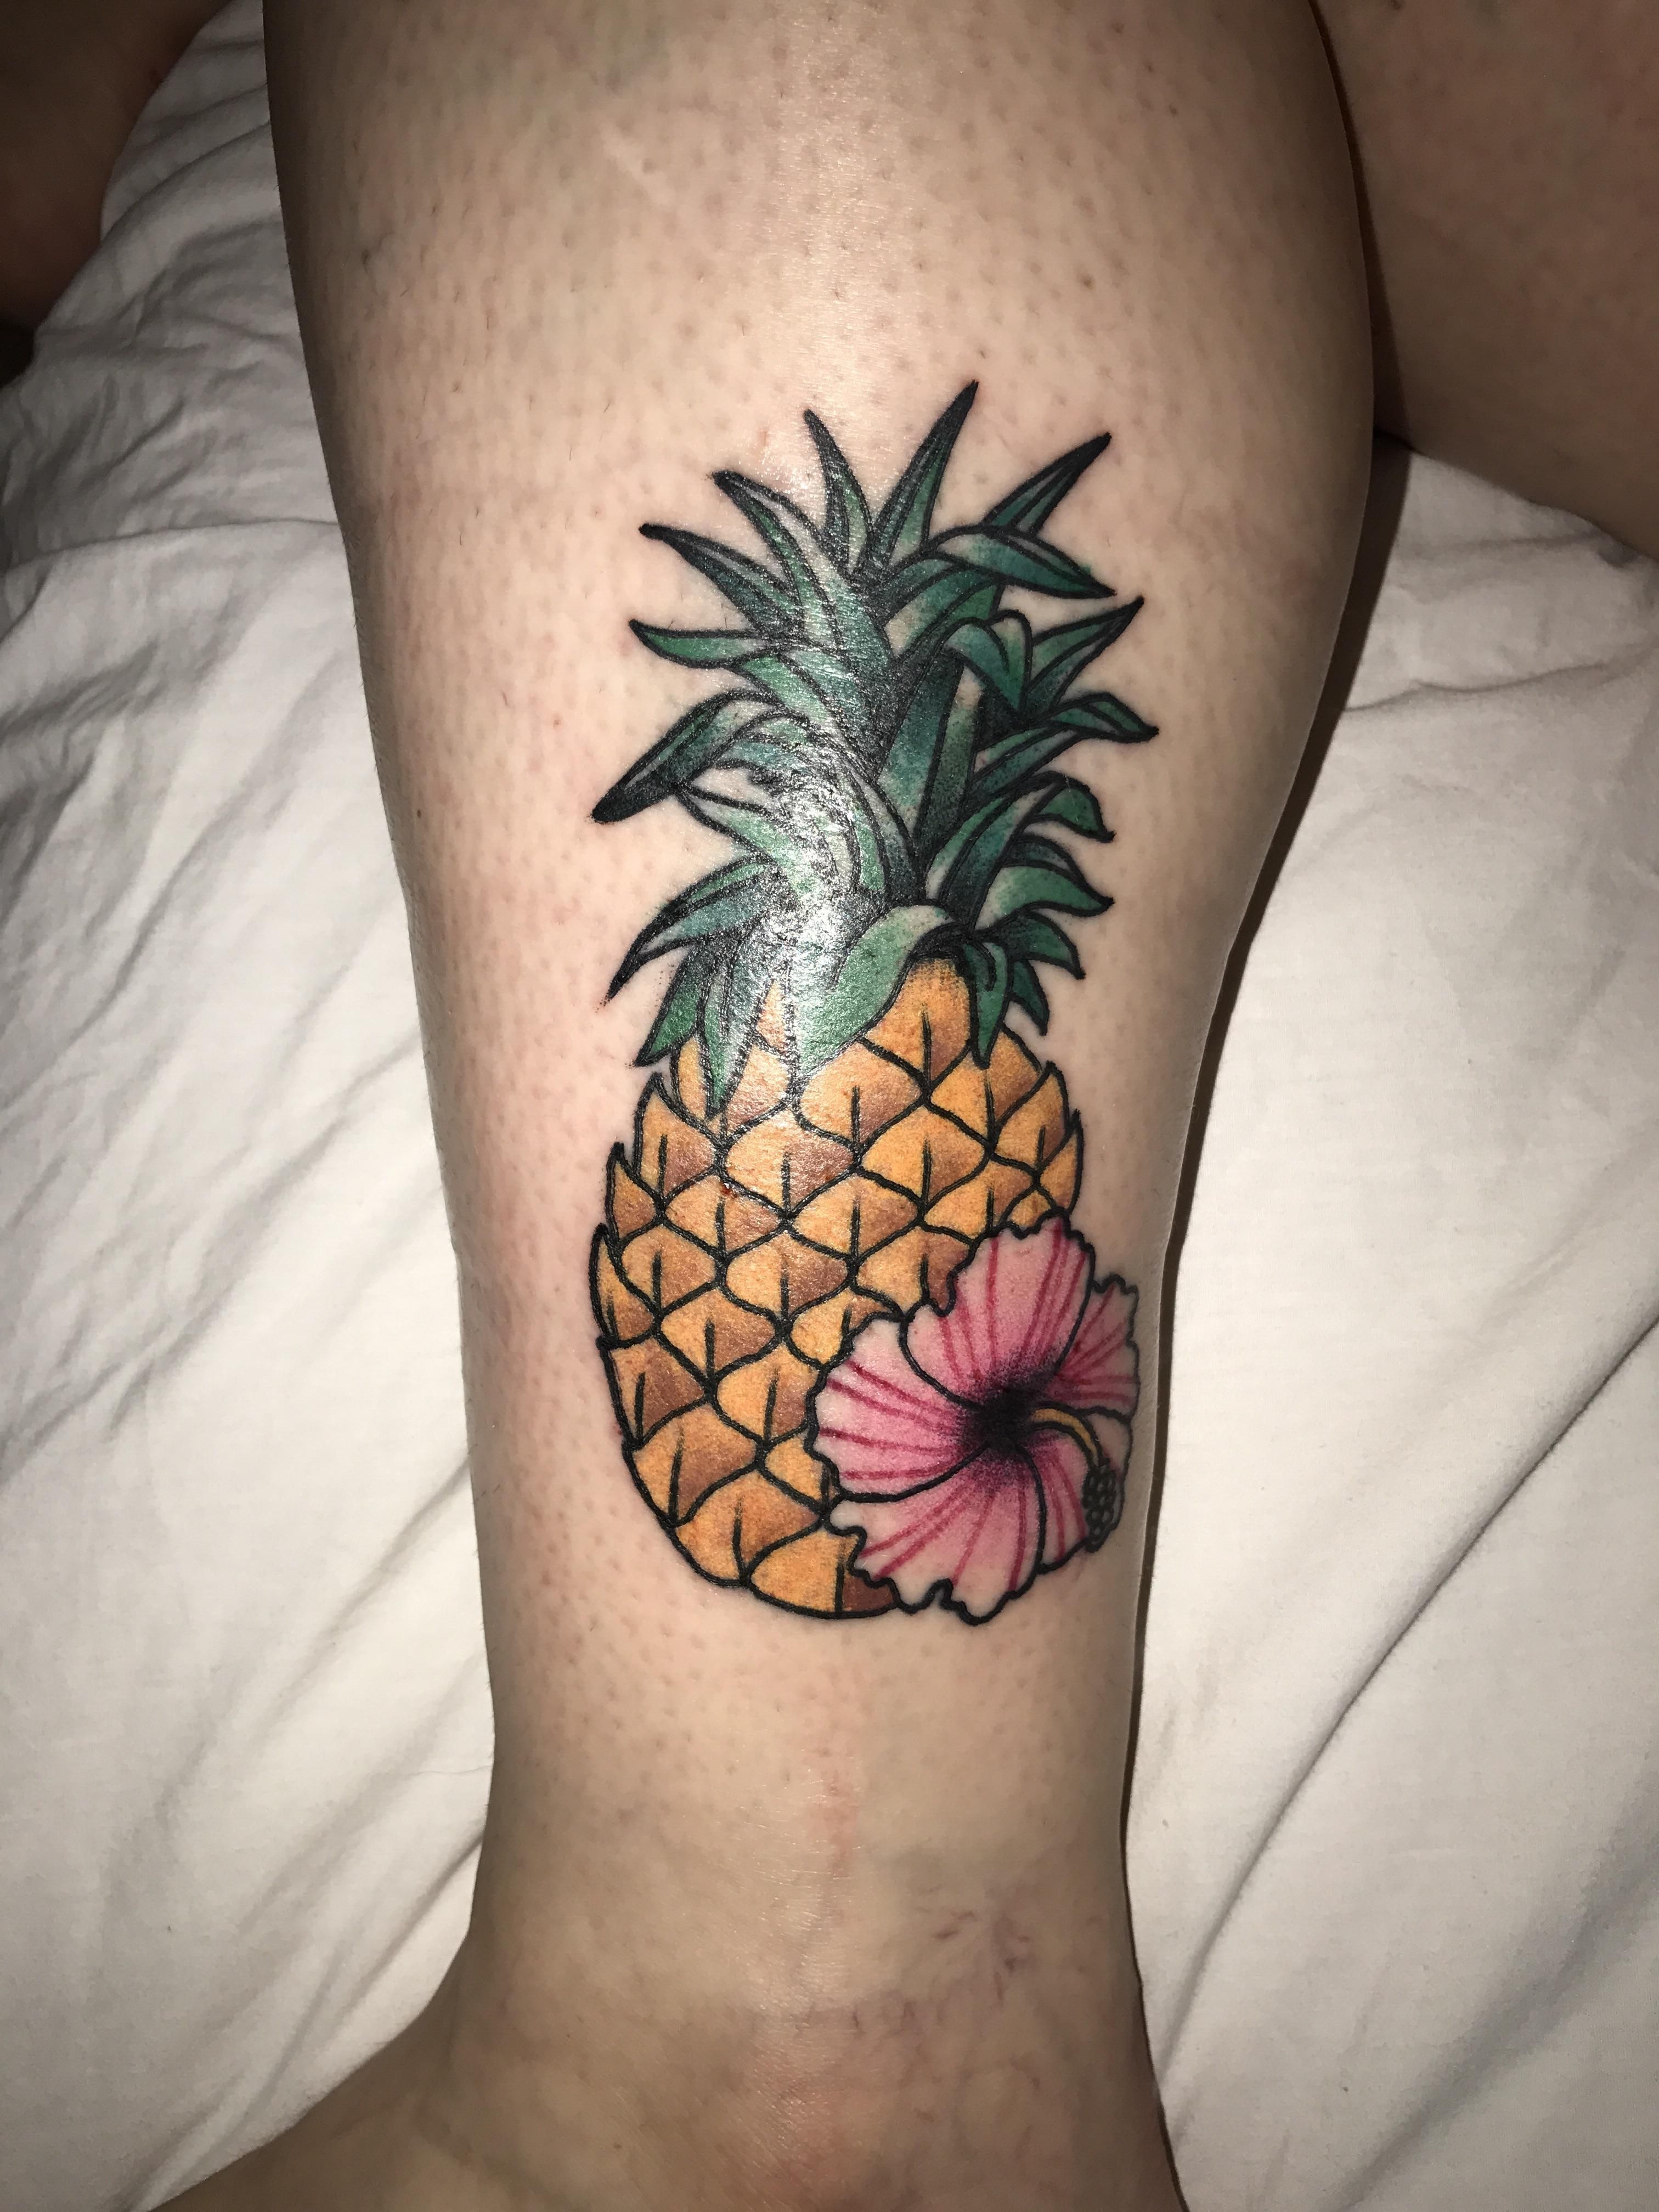 alice mcquade recommends pineapple girly cute tattoos pic